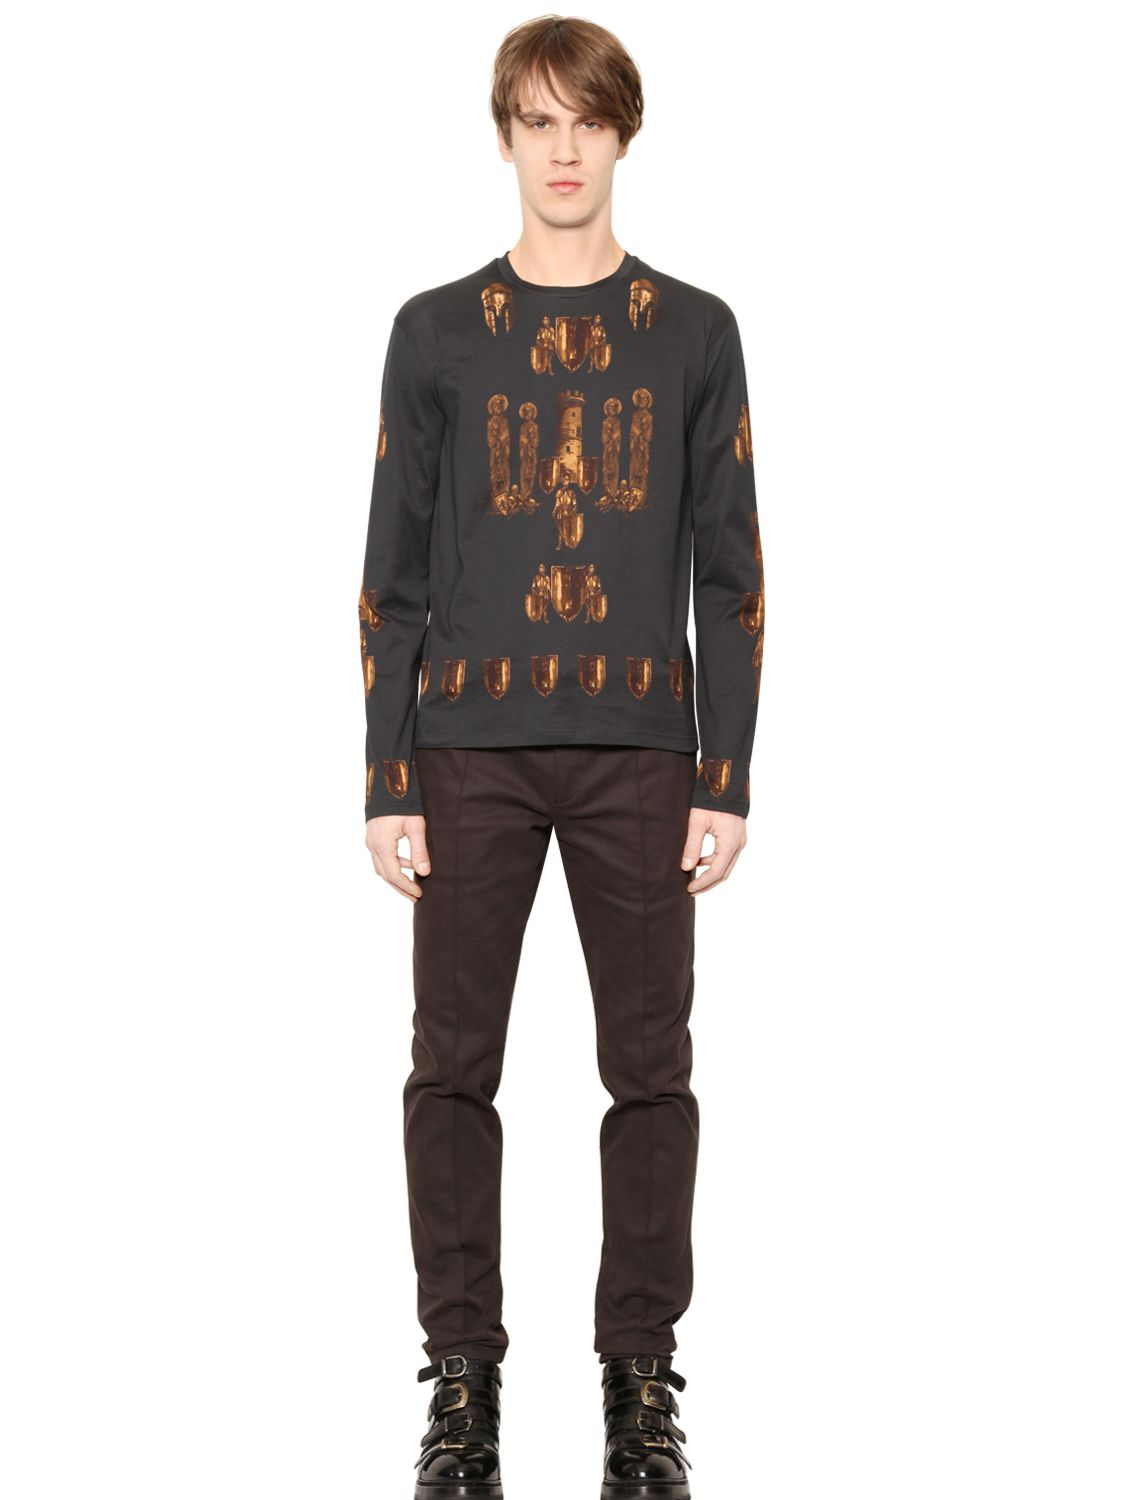 Dolce & gabbana Printed Long Sleeve Cotton T-Shirt in Black for Men | Lyst